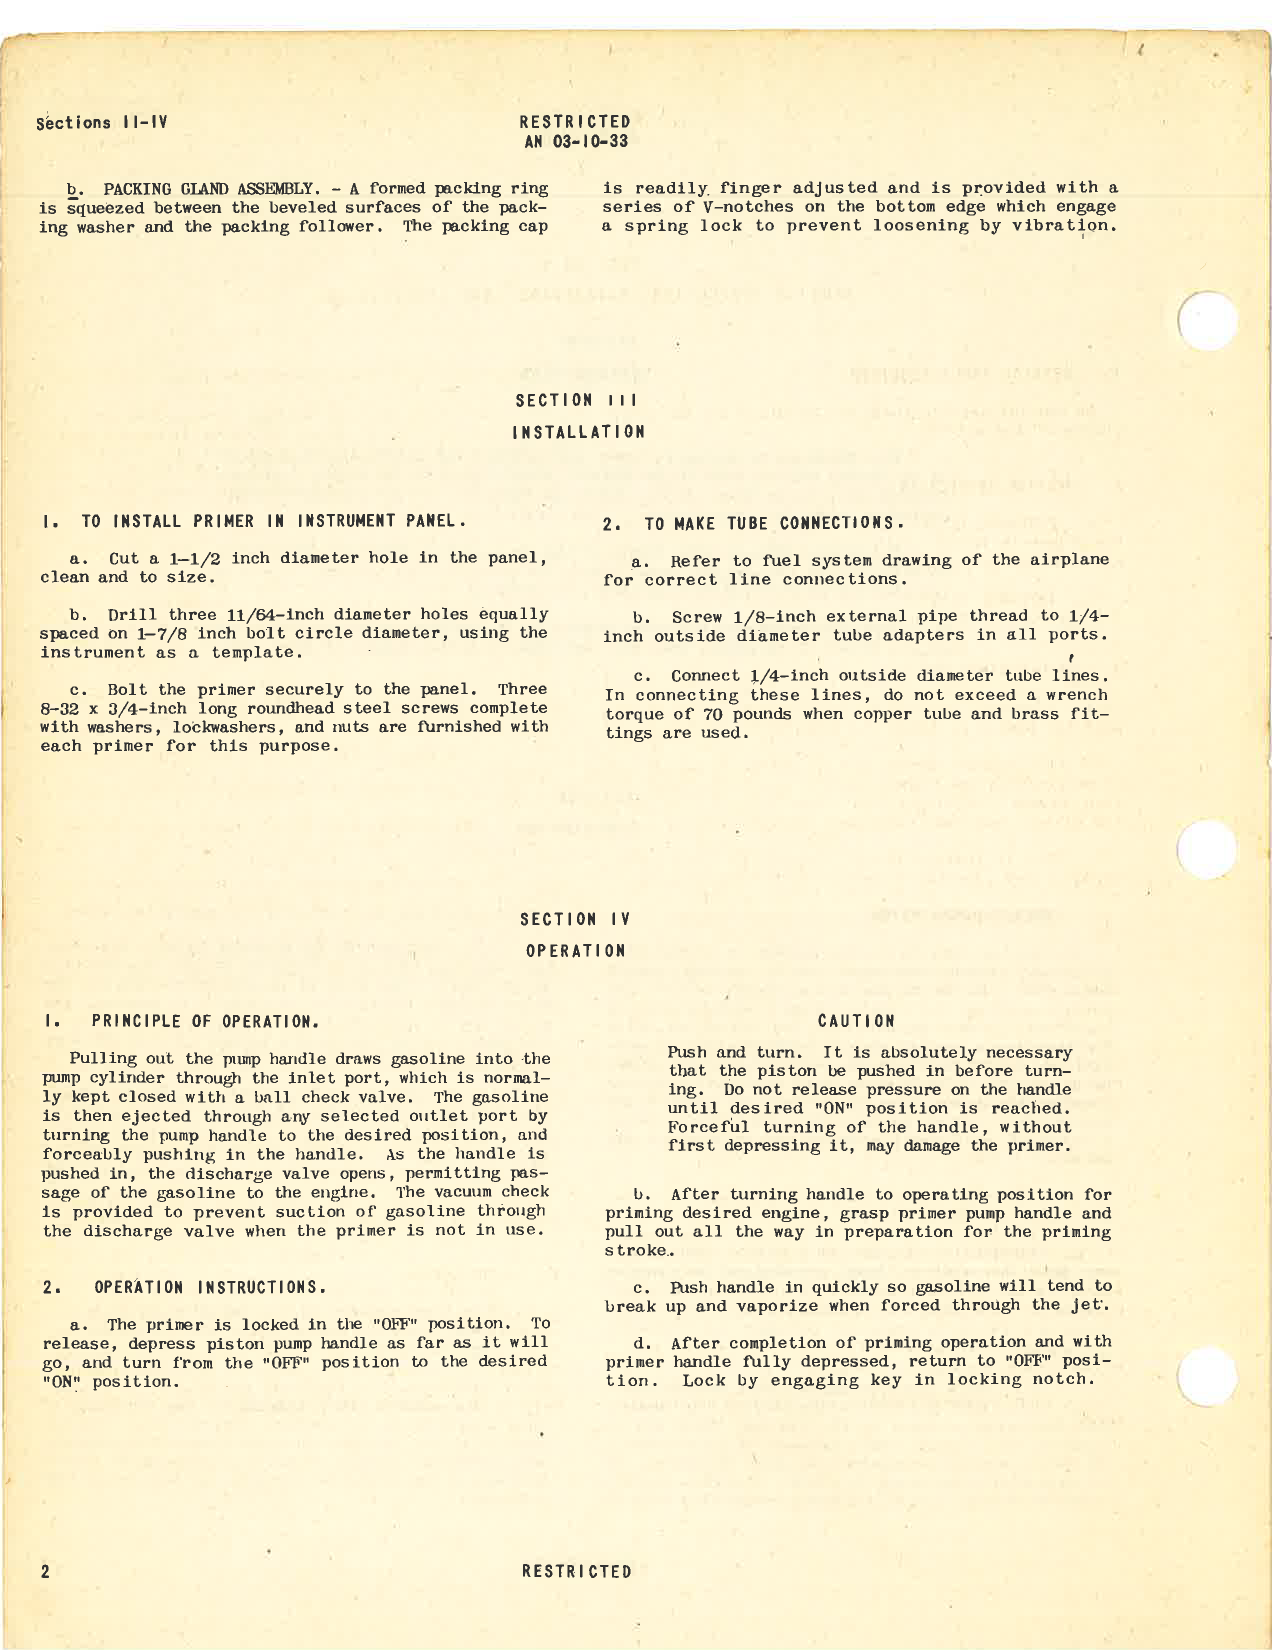 Sample page 6 from AirCorps Library document: Handbook of Instructions with Parts Catalog for Series P4CA-4A Four Engine Primer